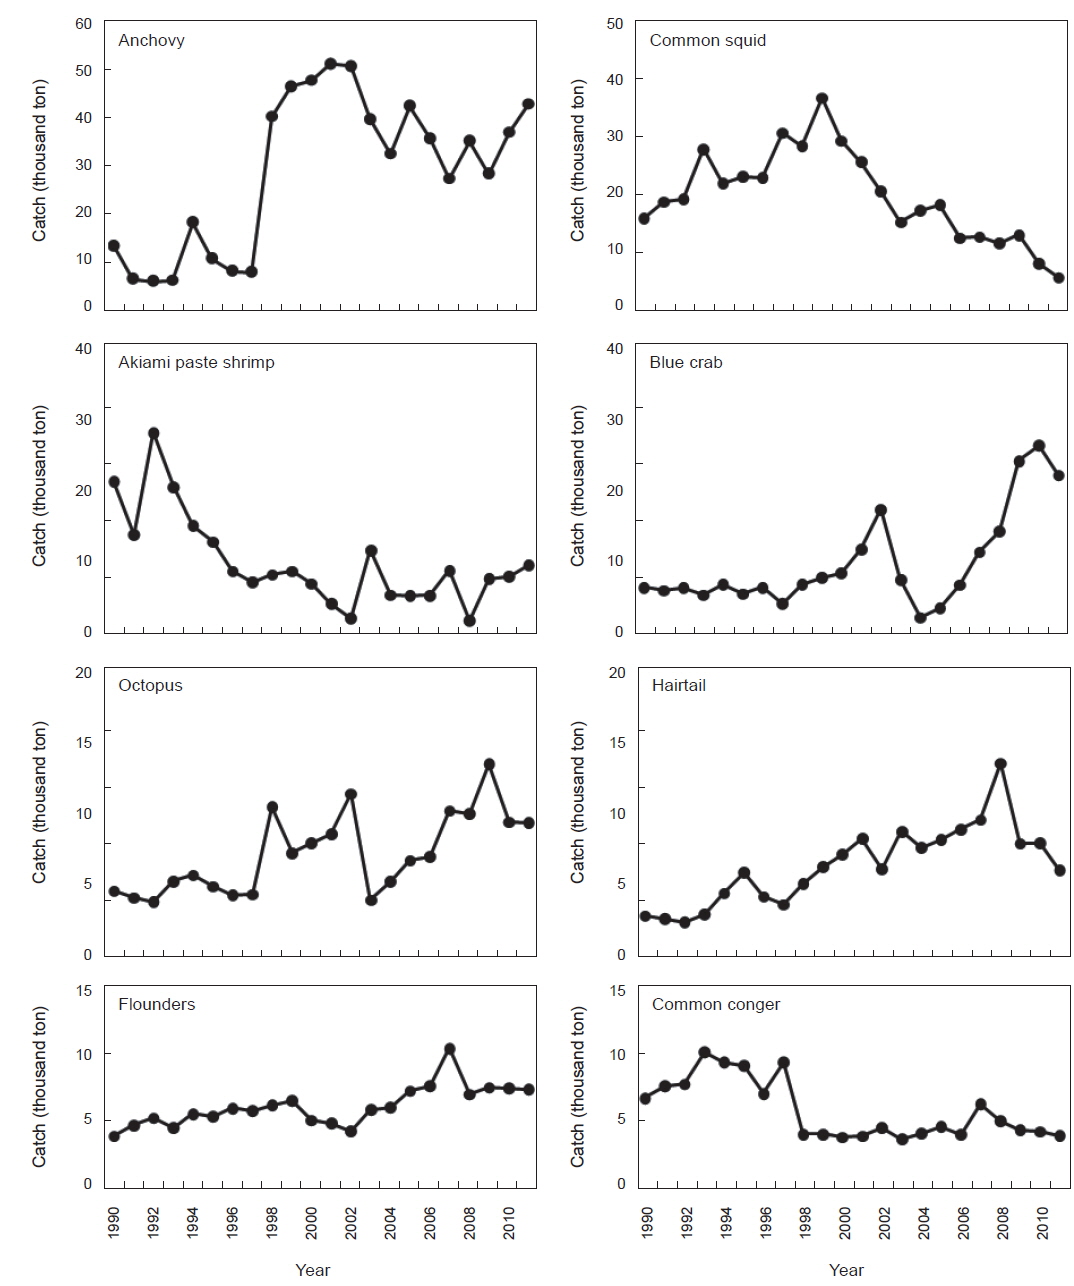 Variations in catch by species caught by coastal fisheries in Korean waters from 1990 to 2011.